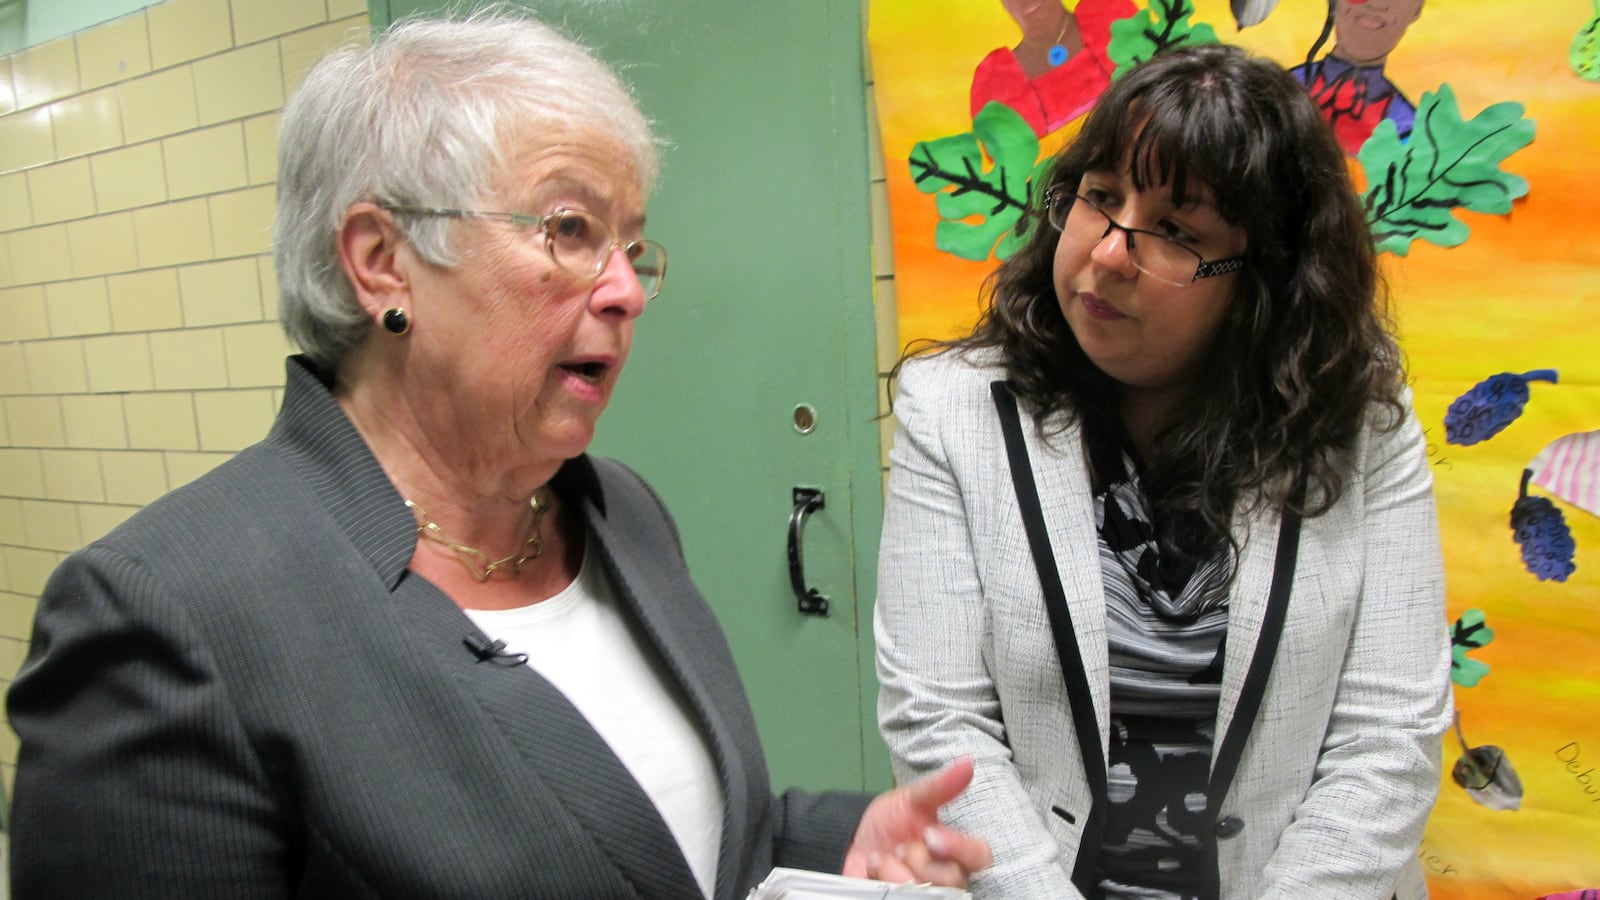 Chancellor Carmen Fariña is preparing to step down in the coming weeks.